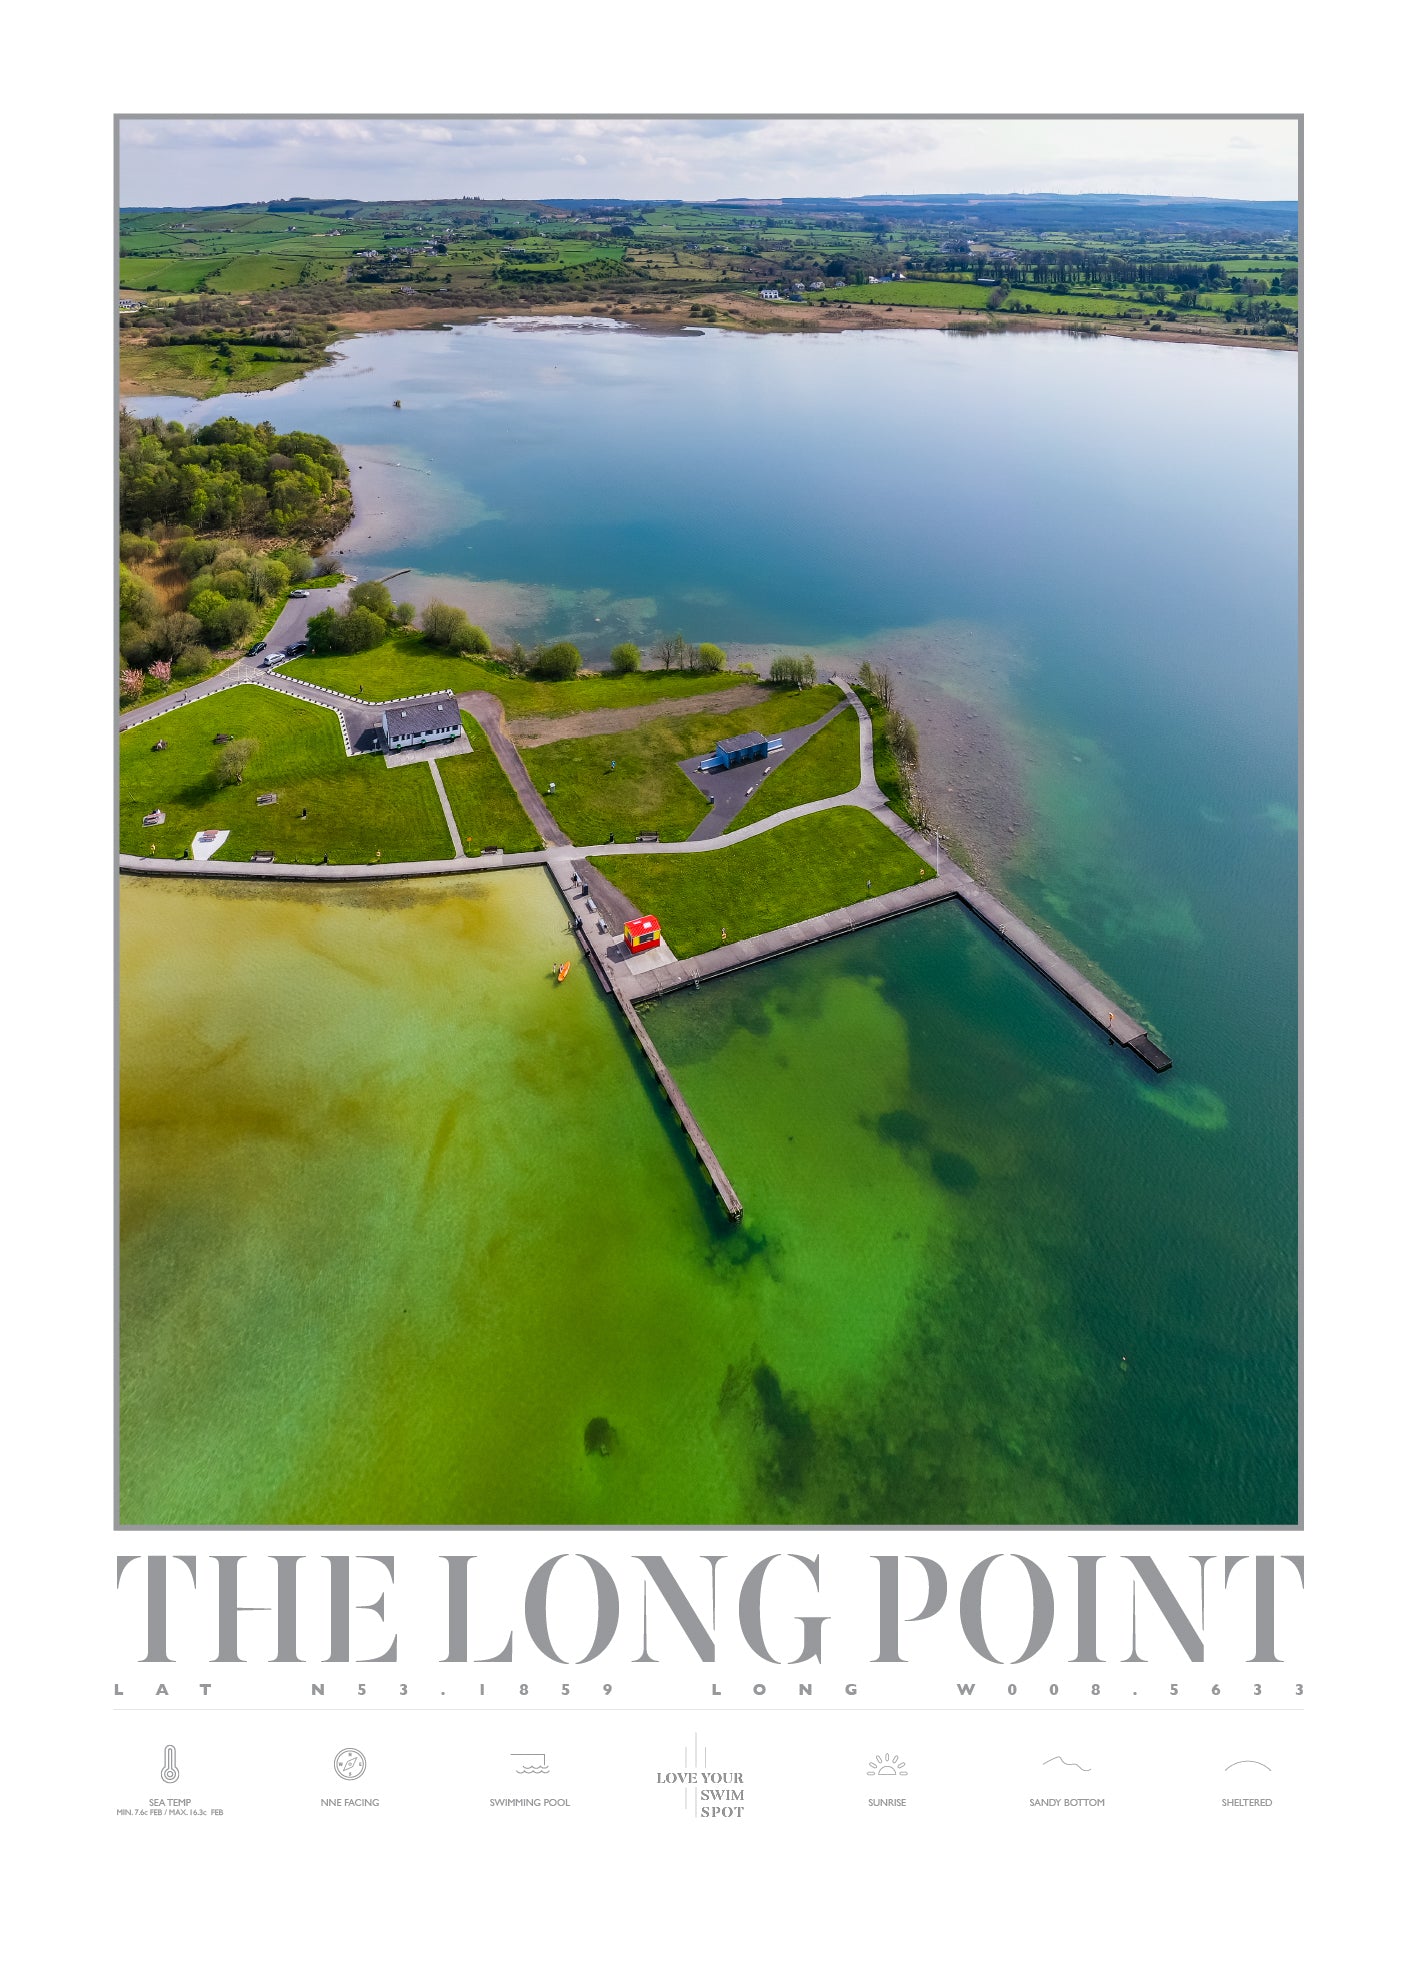 THE LONG POINT LOUGHREA CO GALWAY